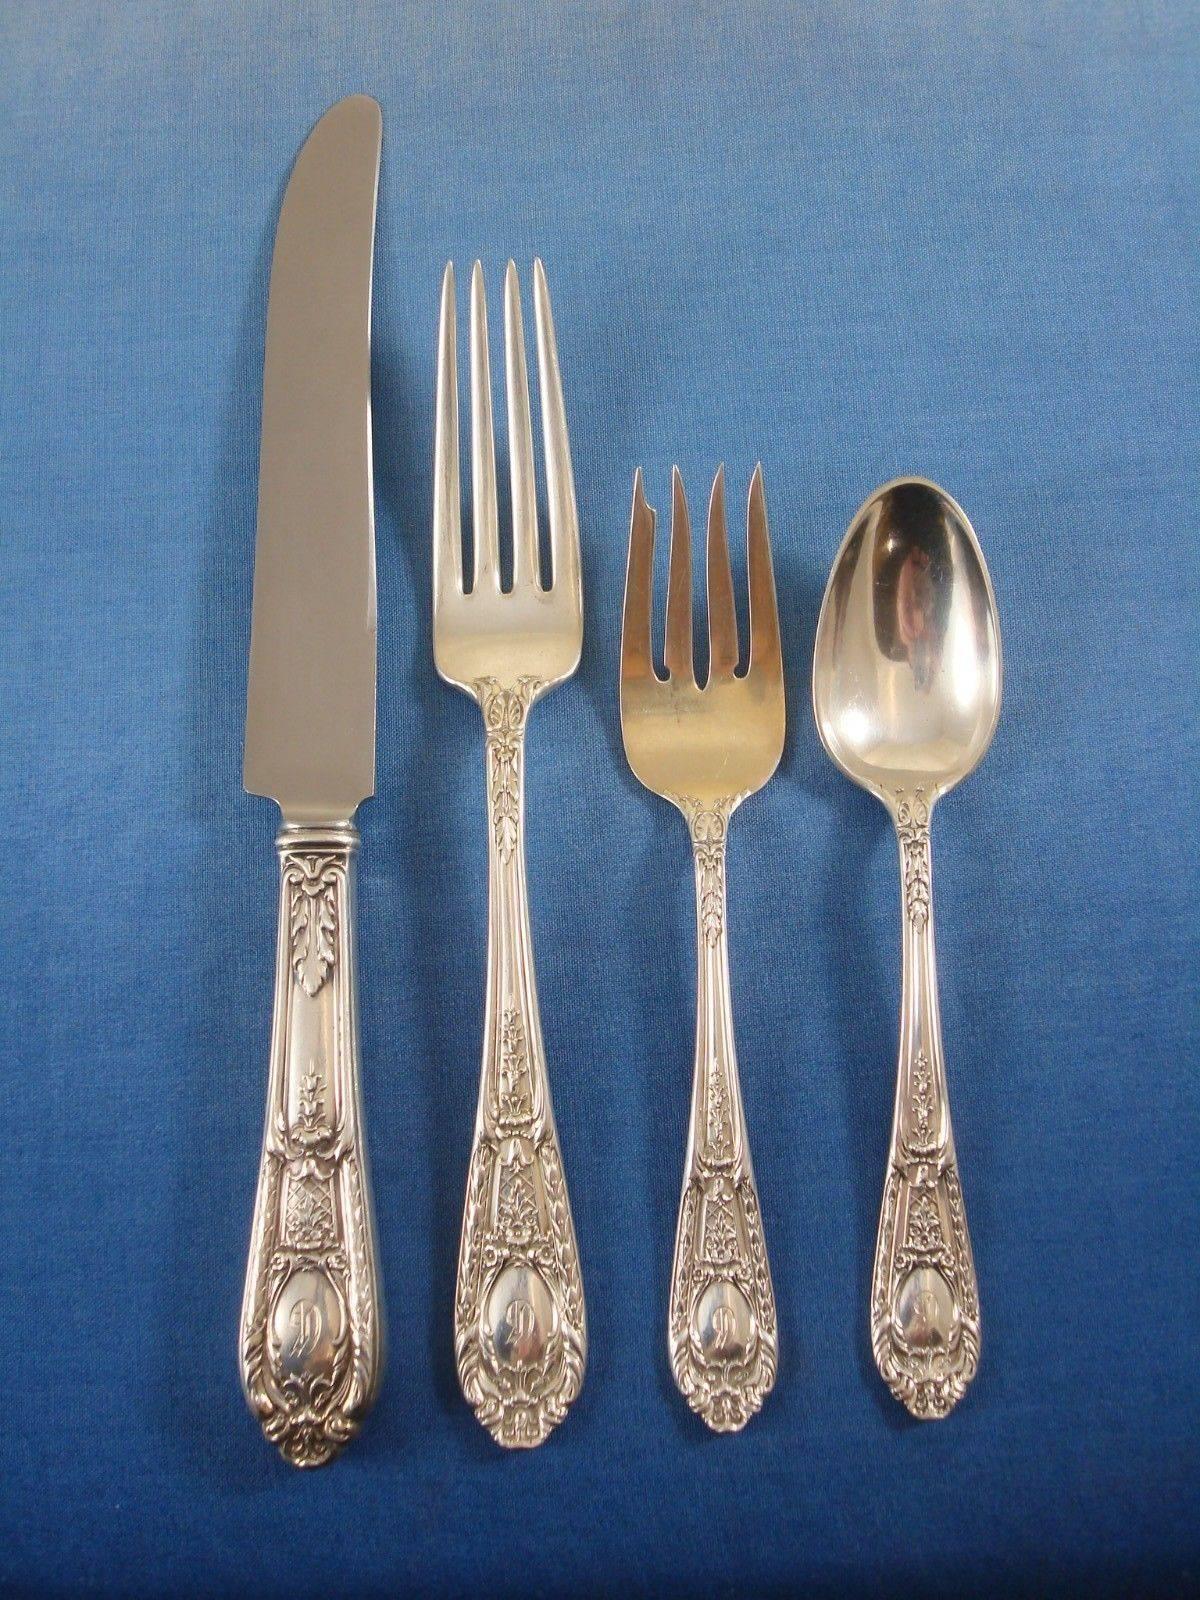 Beautiful monumental Fontaine by International sterling silver dinner size flatware set in fitted original box of 125 pieces. This pattern is wonderfully heavy. This set includes:

12 dinner size knives, 9 1/2